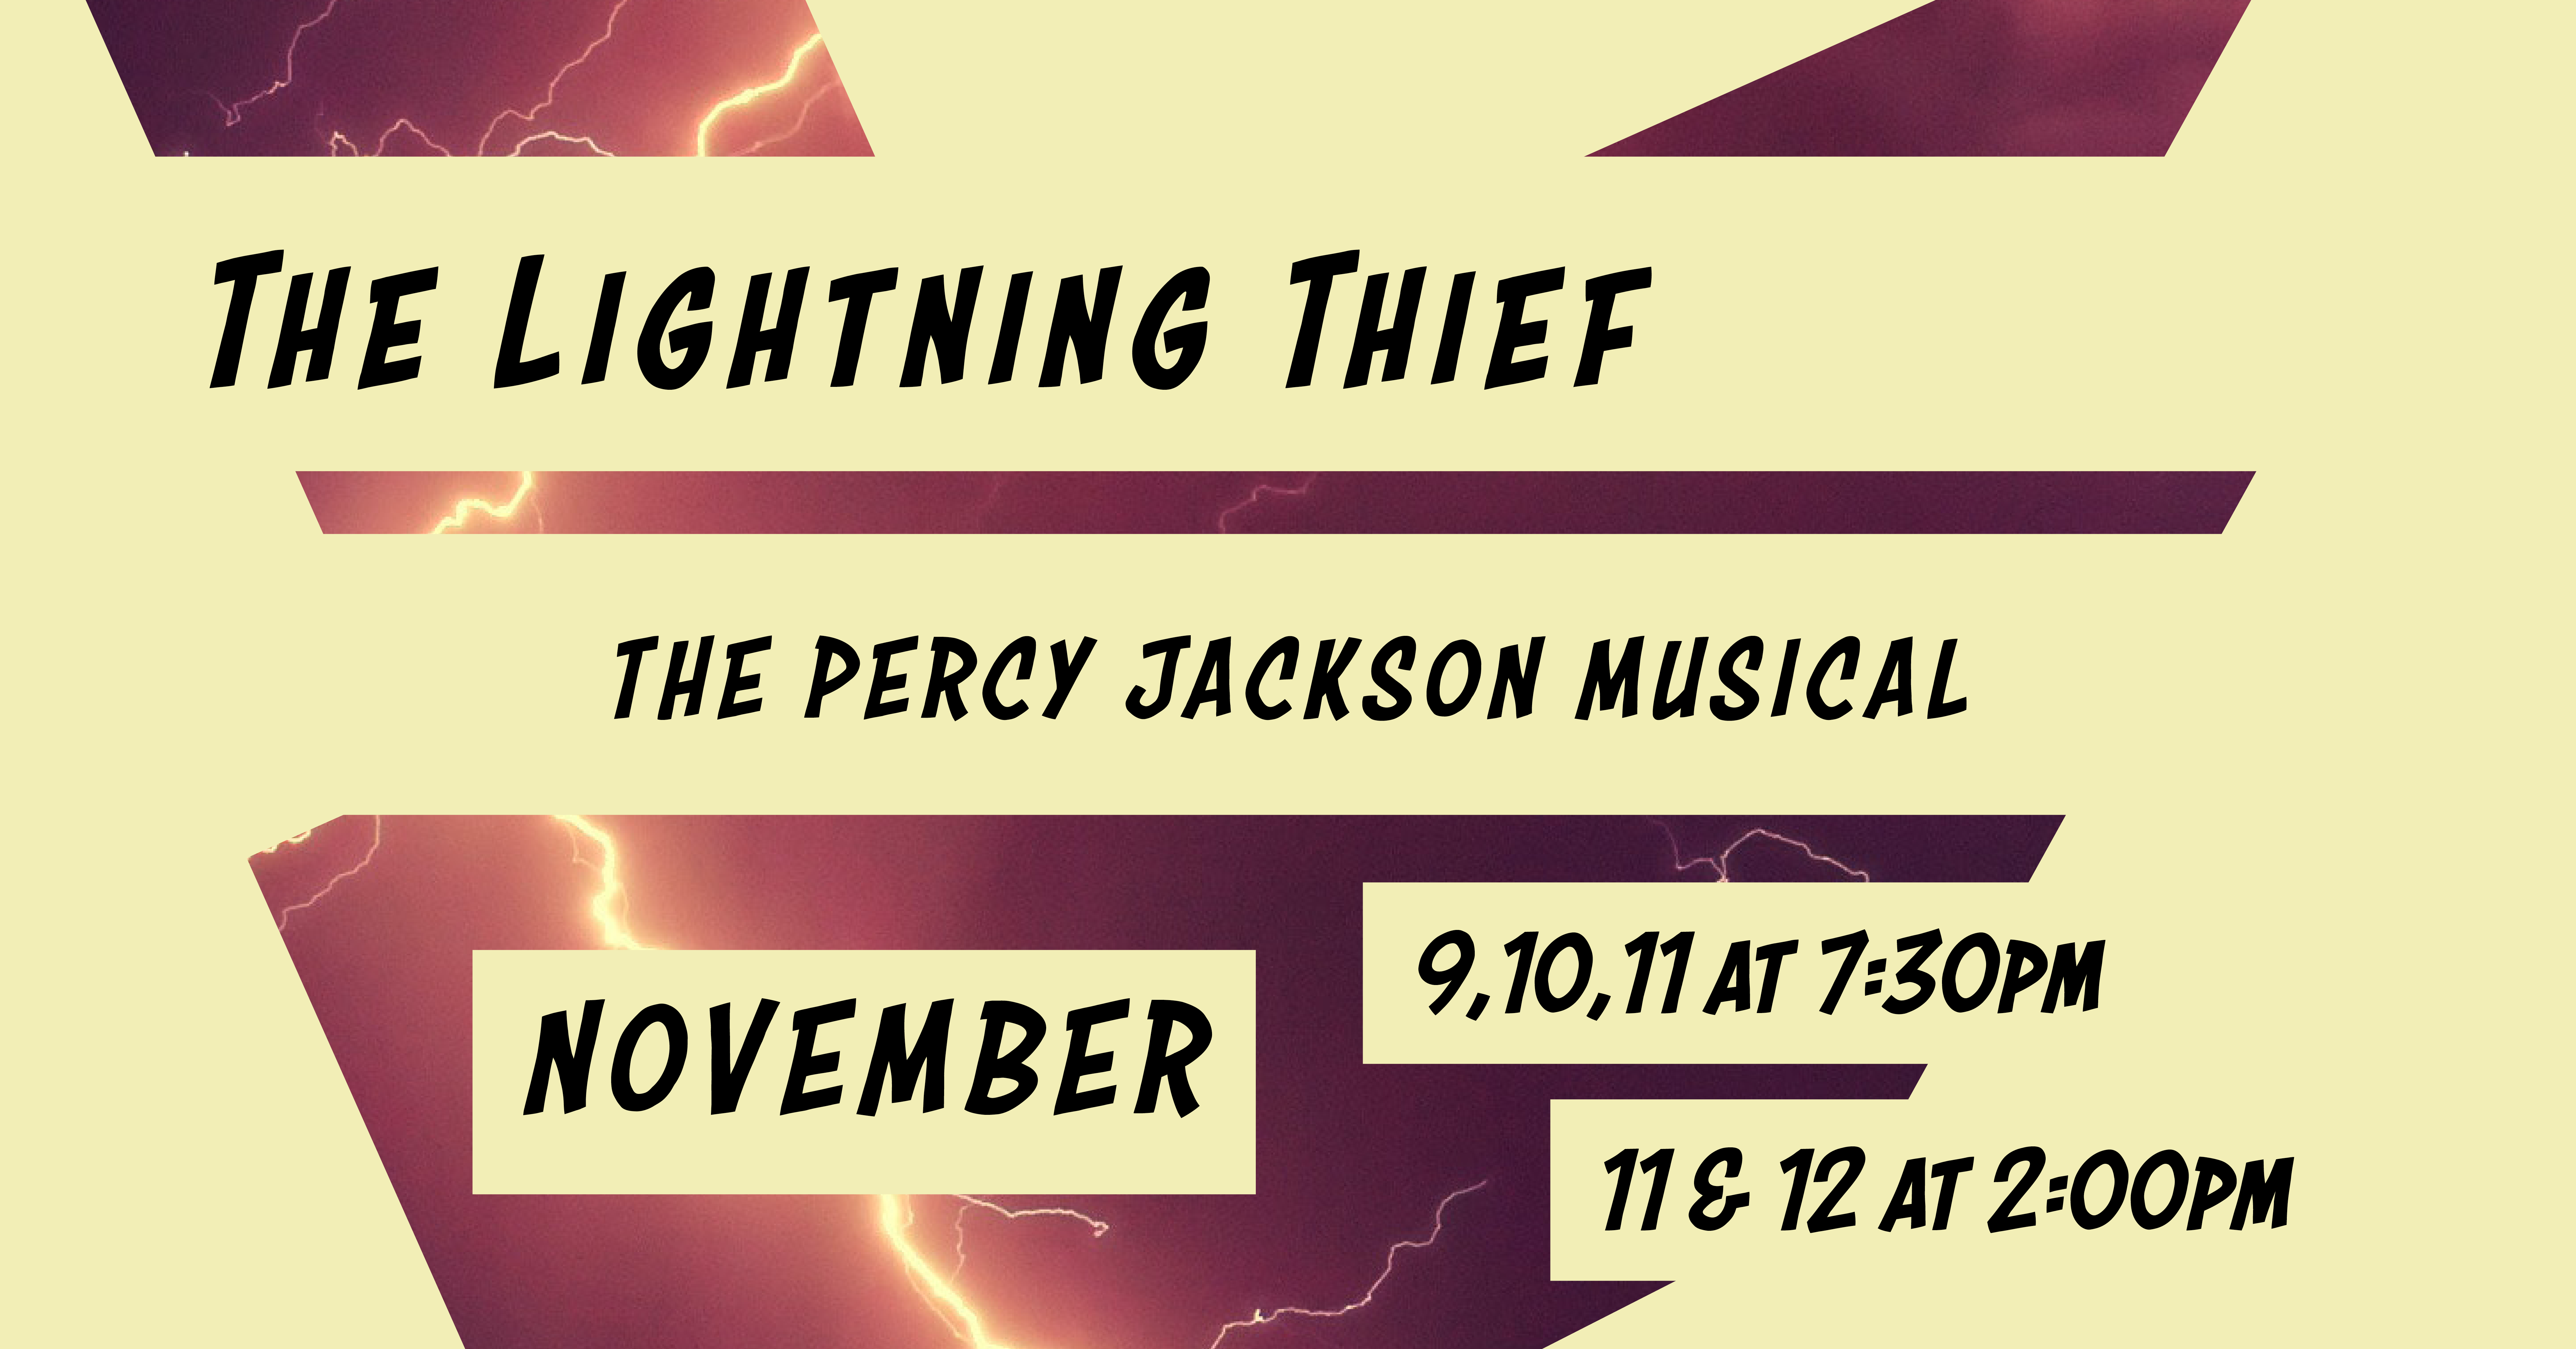 A lighting strike with yellow geometric cut-outs that say "The Lightning Thief, The Percy Jackson Musical, November 9,10,11 at 7:30pm and November 11 & 12 at 2:00pm."